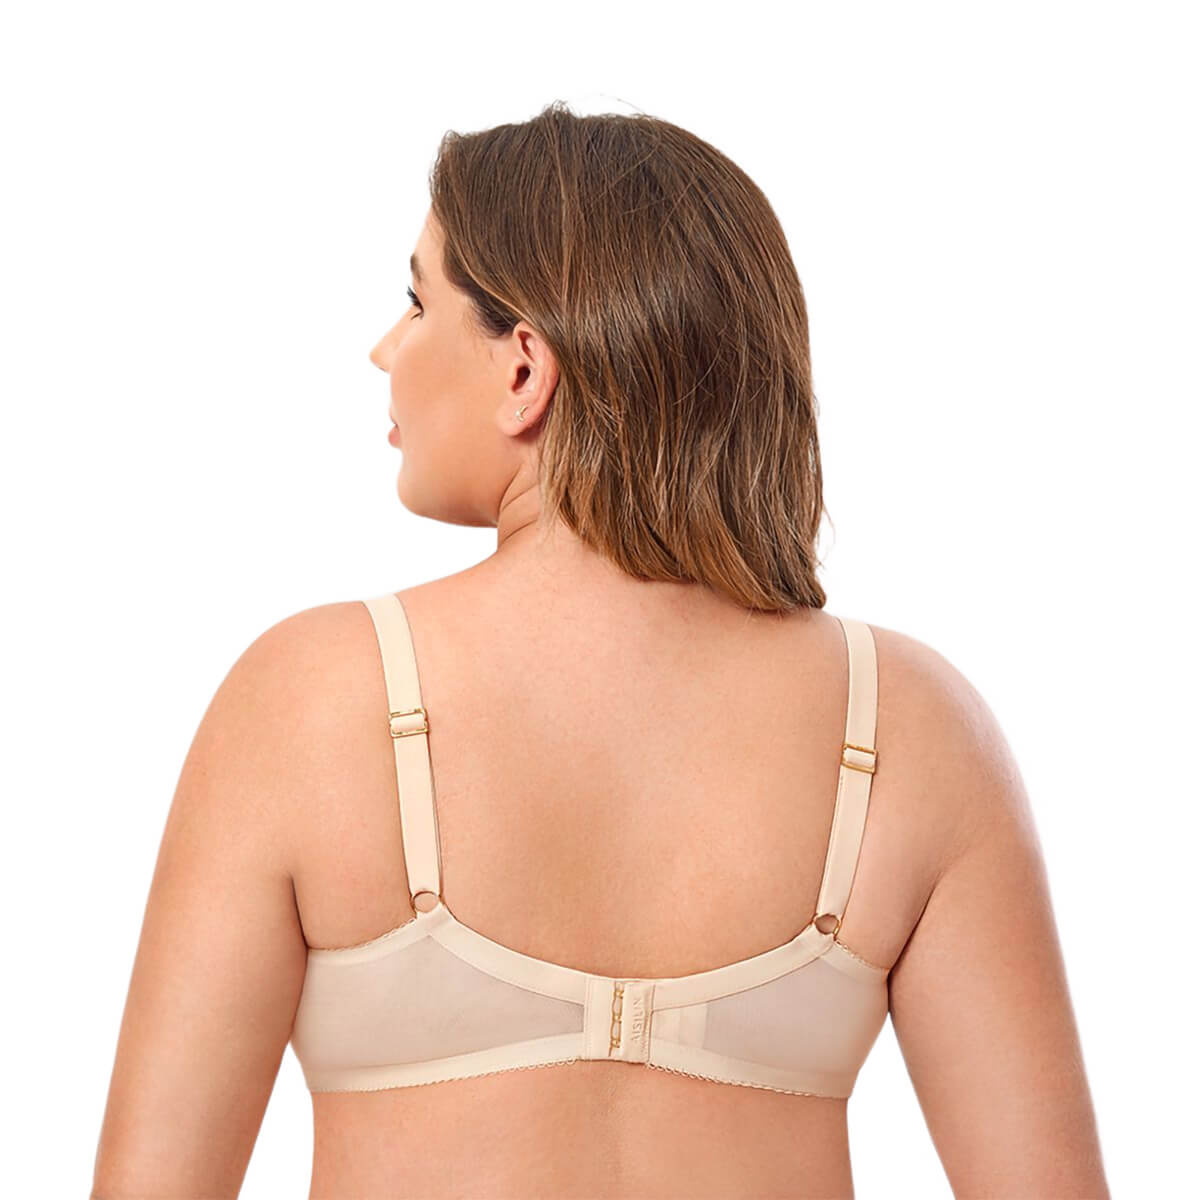 Buy Women's Full Figure Support Slightly Padded Underwire Contour Lace  T-Shirt Bra Plus Size Beige02 Cup Size dd Bands Size 36 at